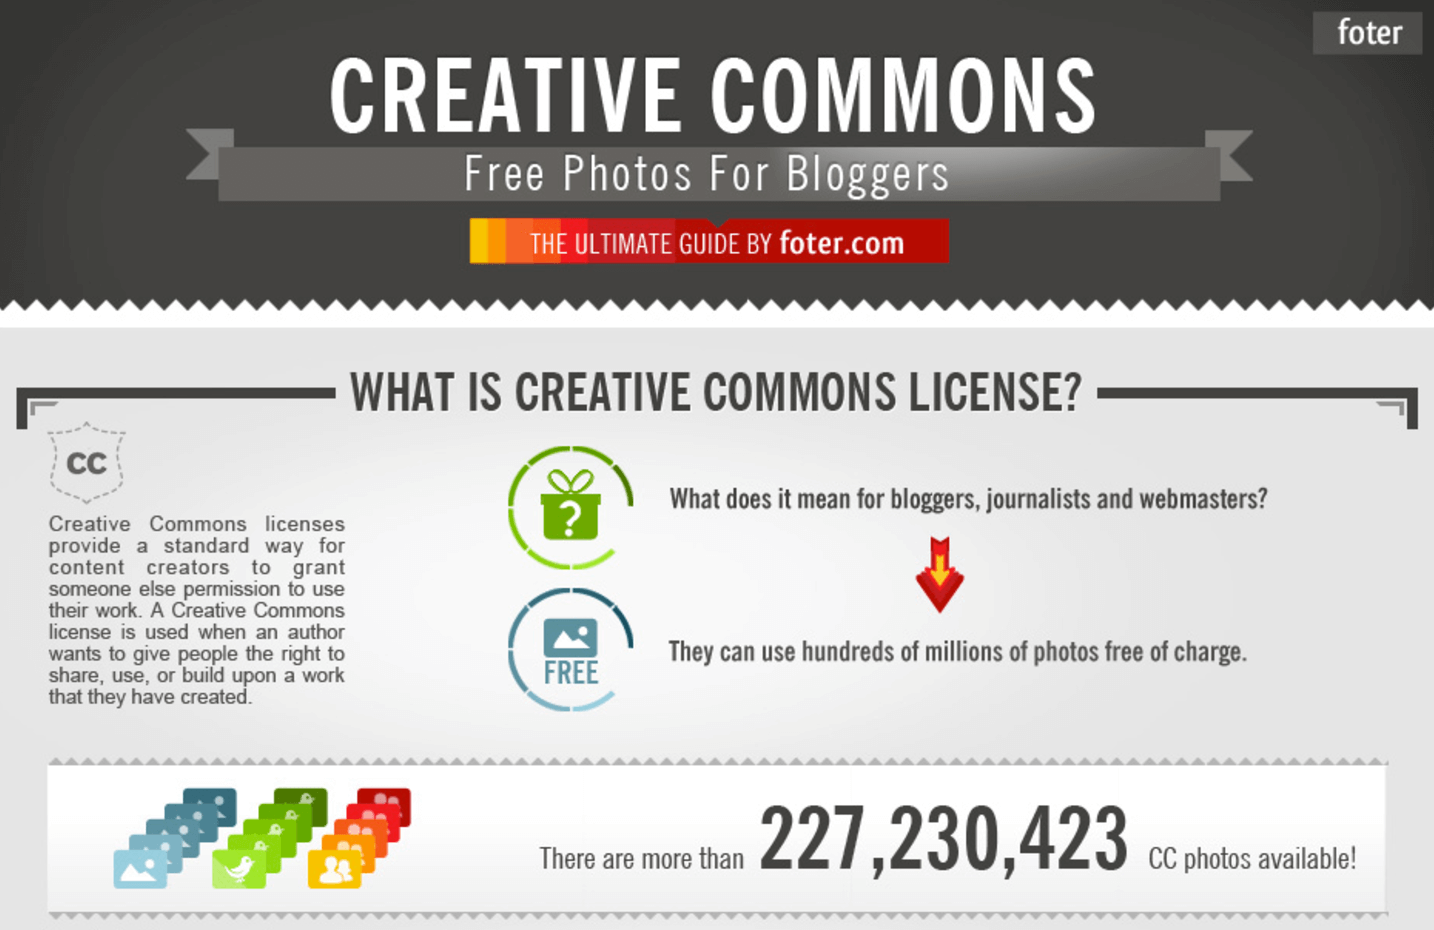 The Definitive Guide to Finding Images for Blog Posts and Content